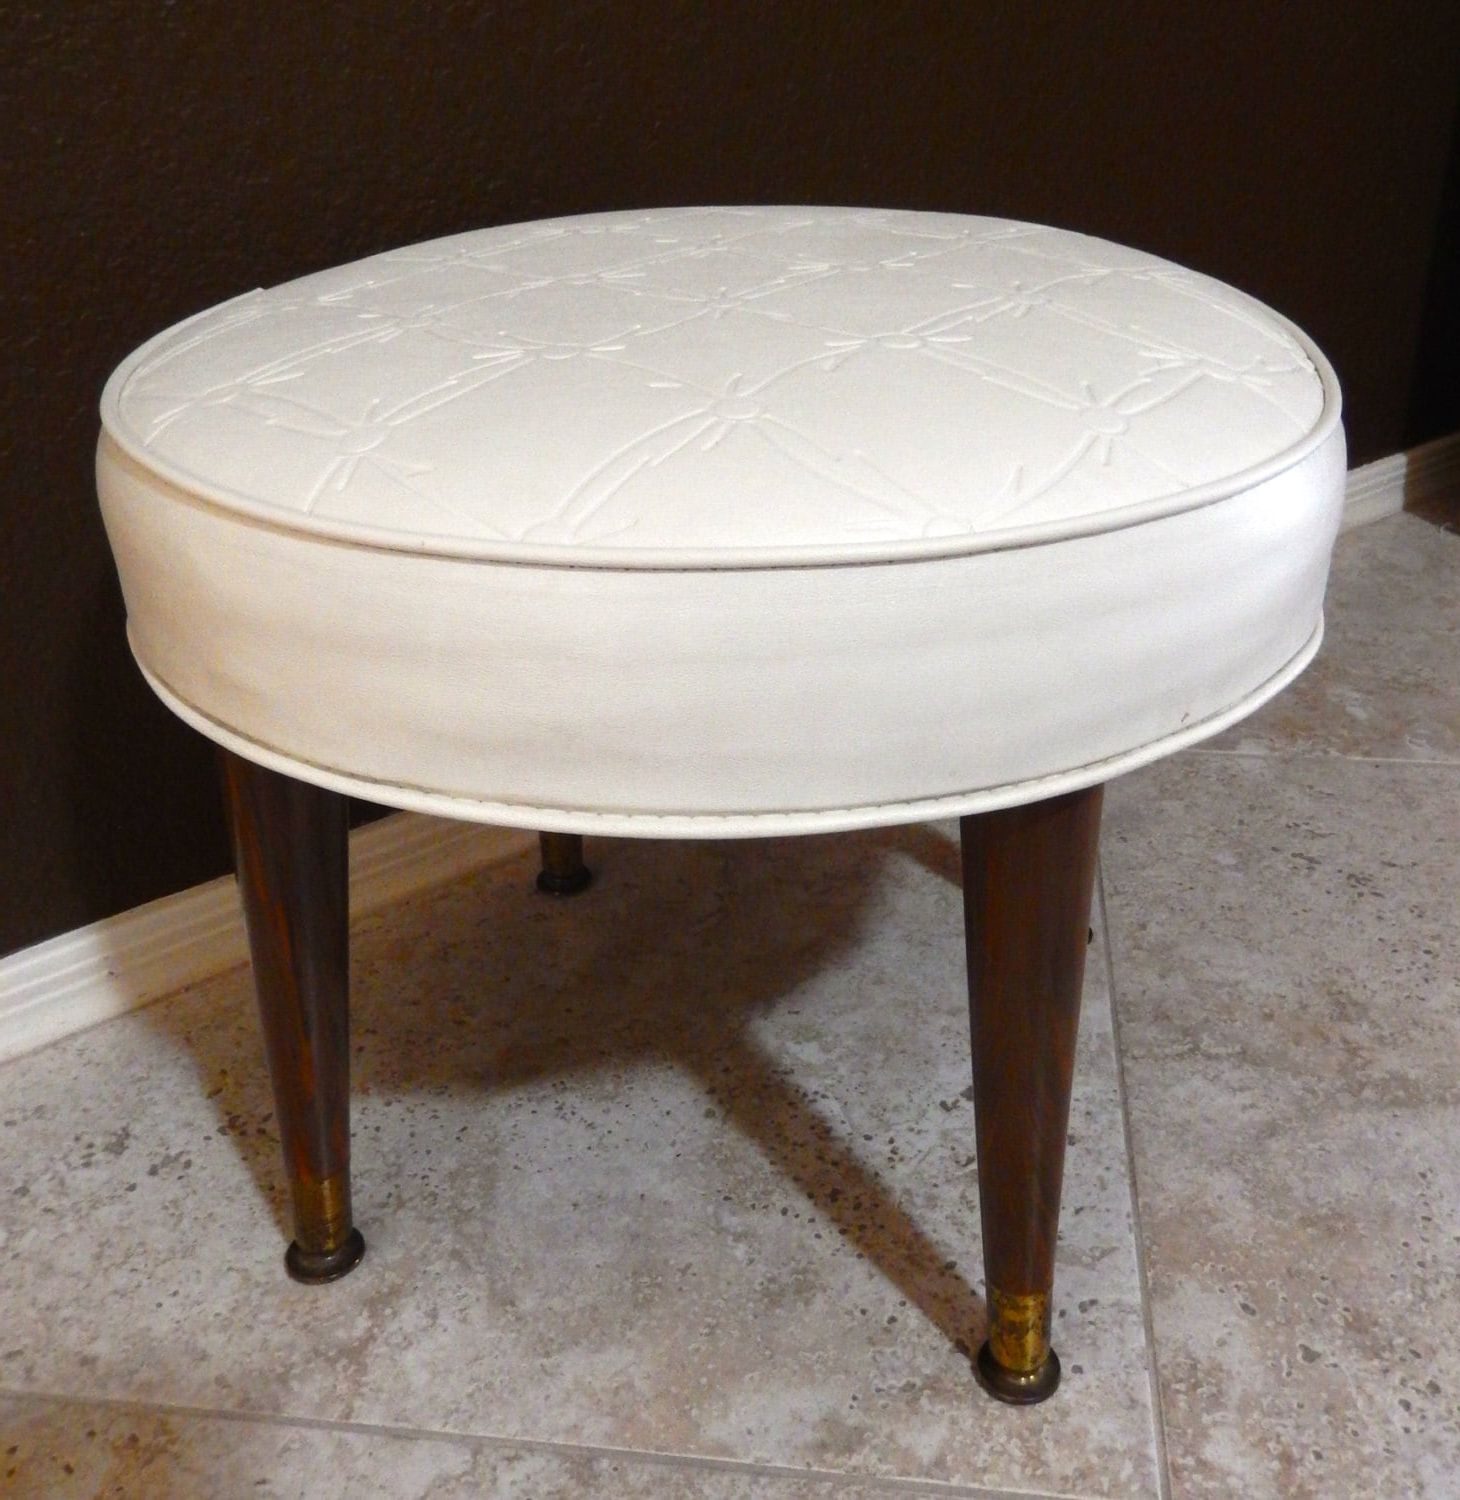 Favorite Mid Century Modern Round White Patterned Vinyl Ottoman Foot Stool Within Modern Gibson White Small Round Ottomans (View 1 of 10)